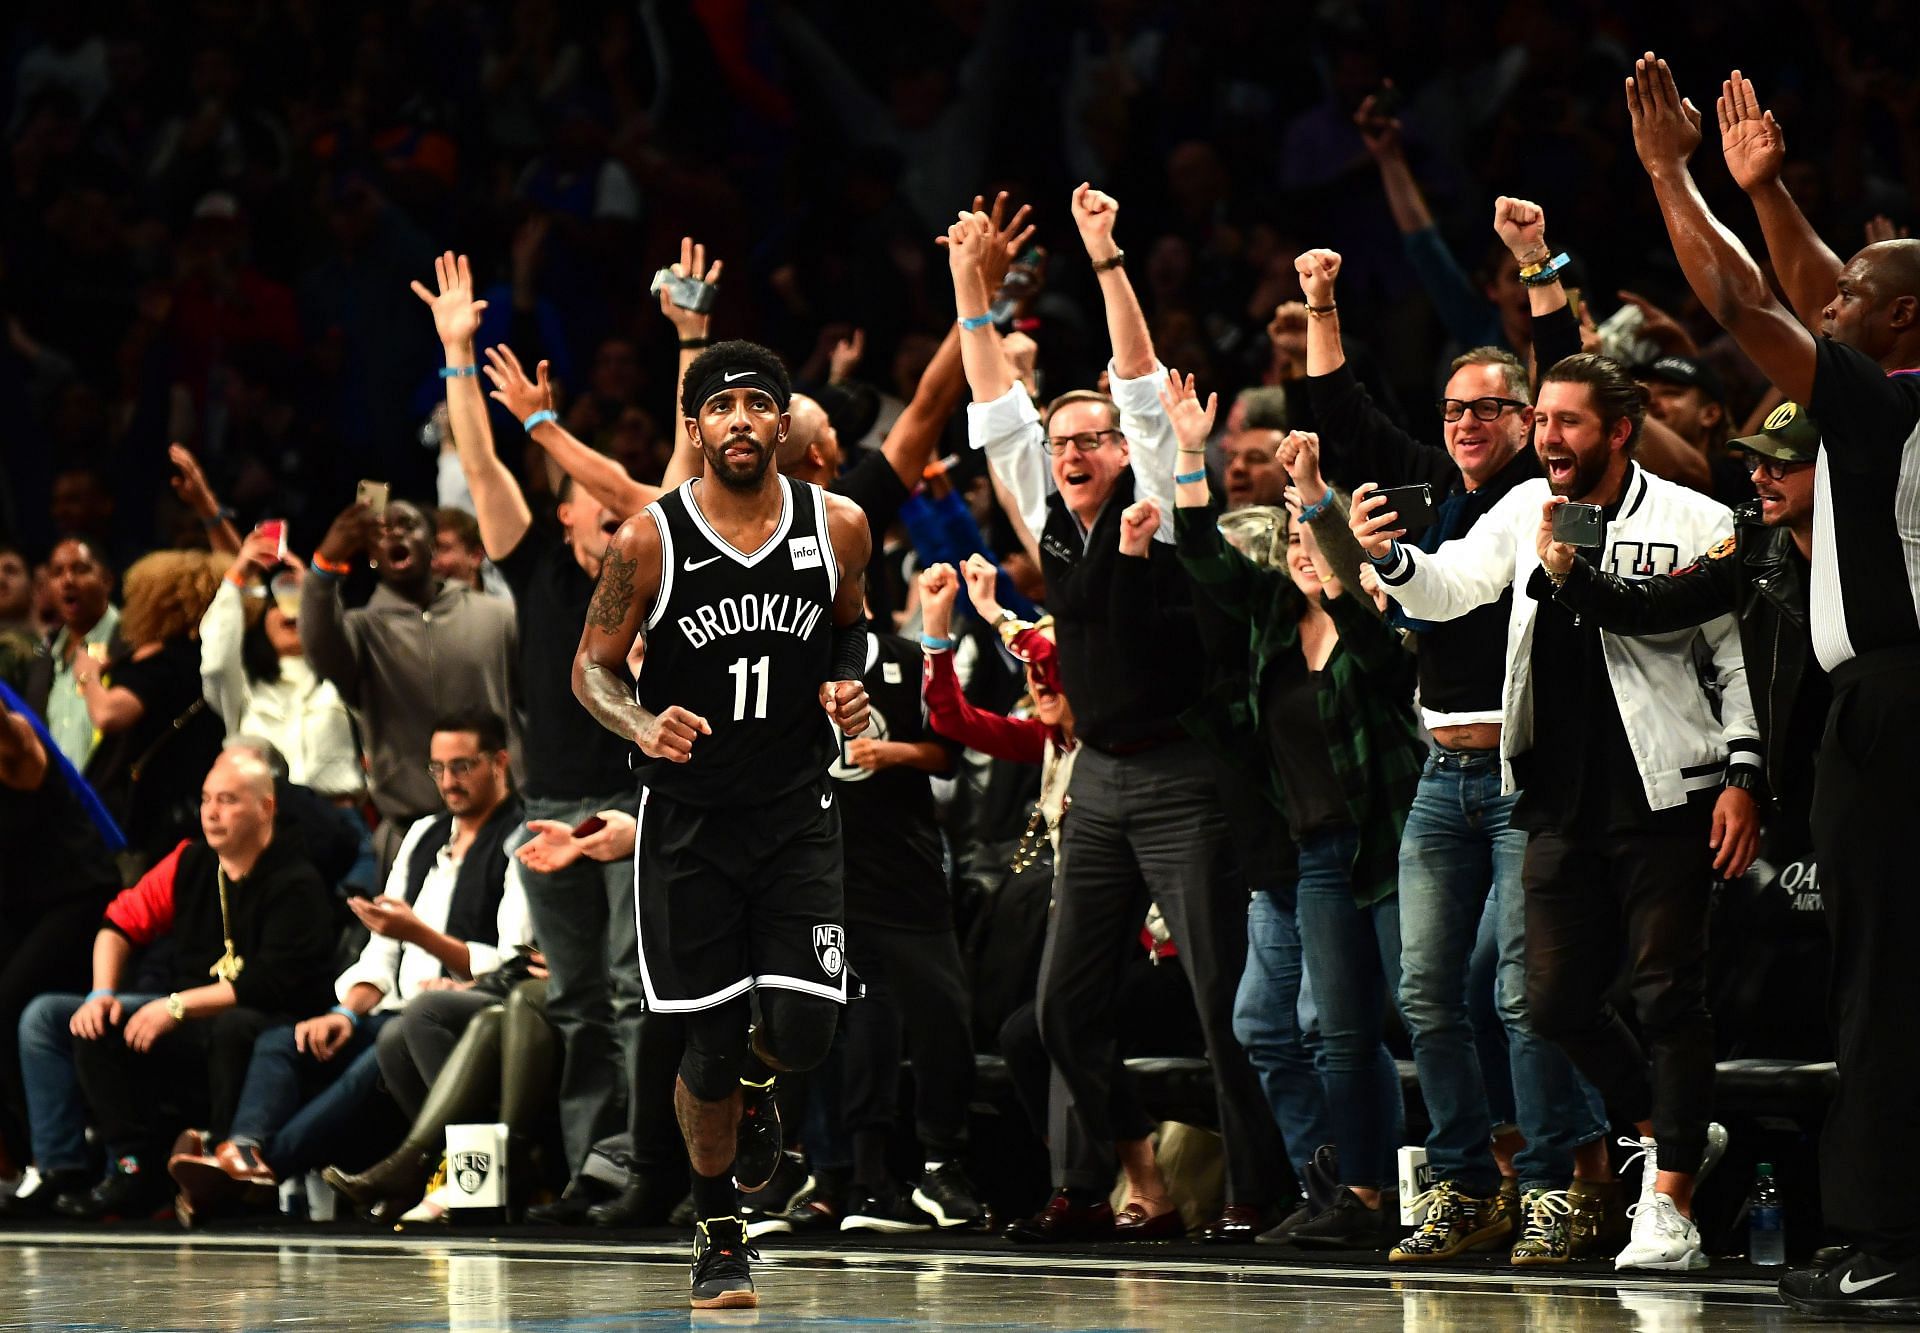 Brooklyn Nets fans celebrate their win over the New York Knicks.